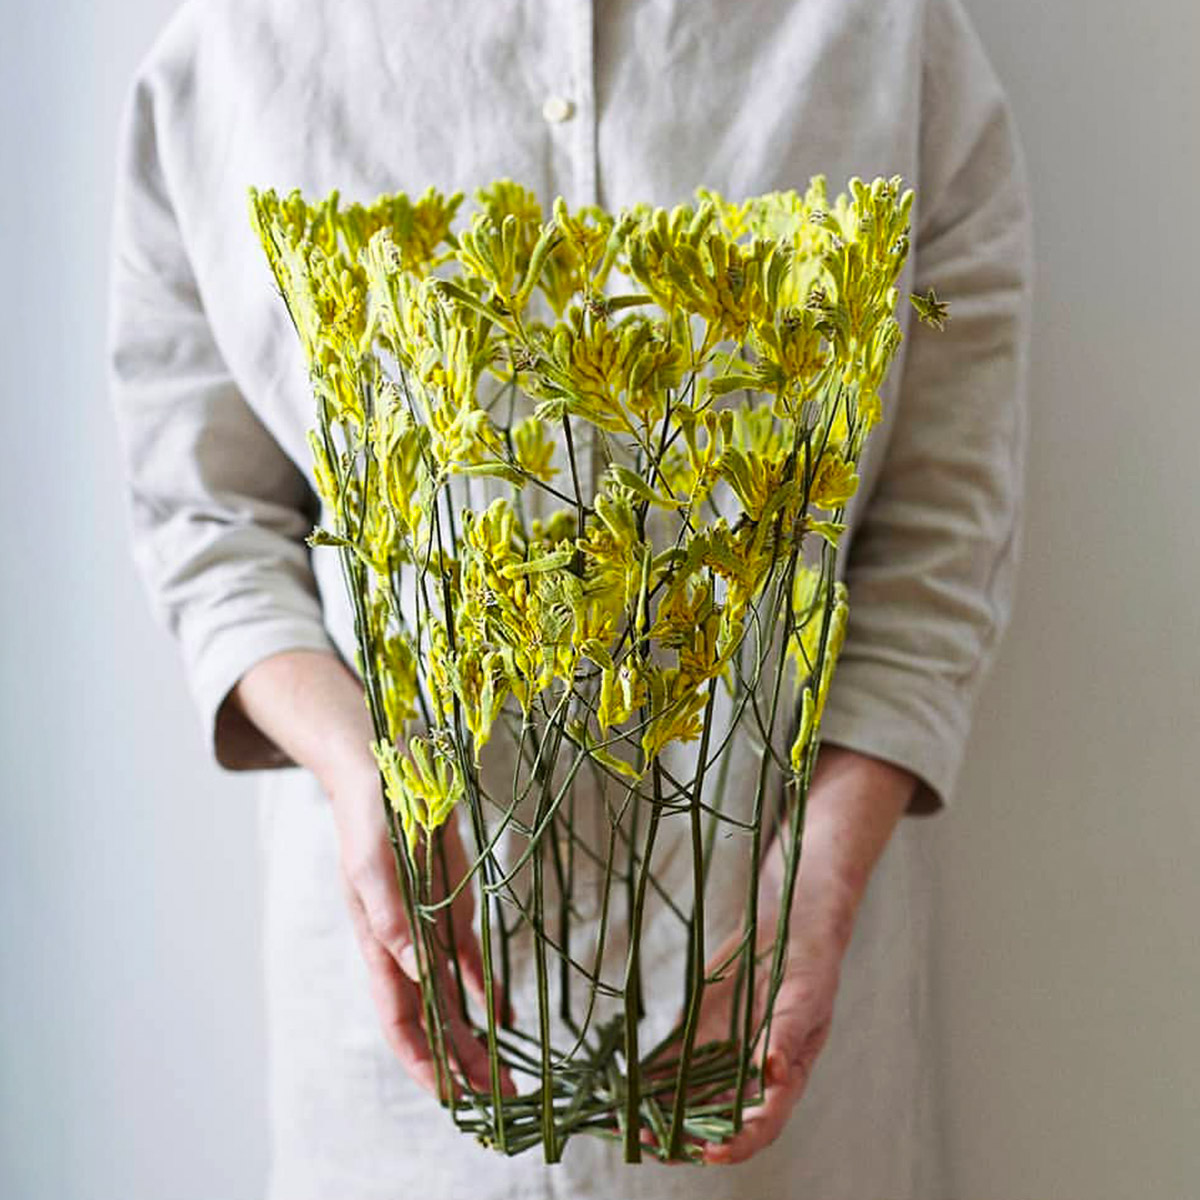 Sculptural vessels dried flowers Shannon Clegg feature on Thursd